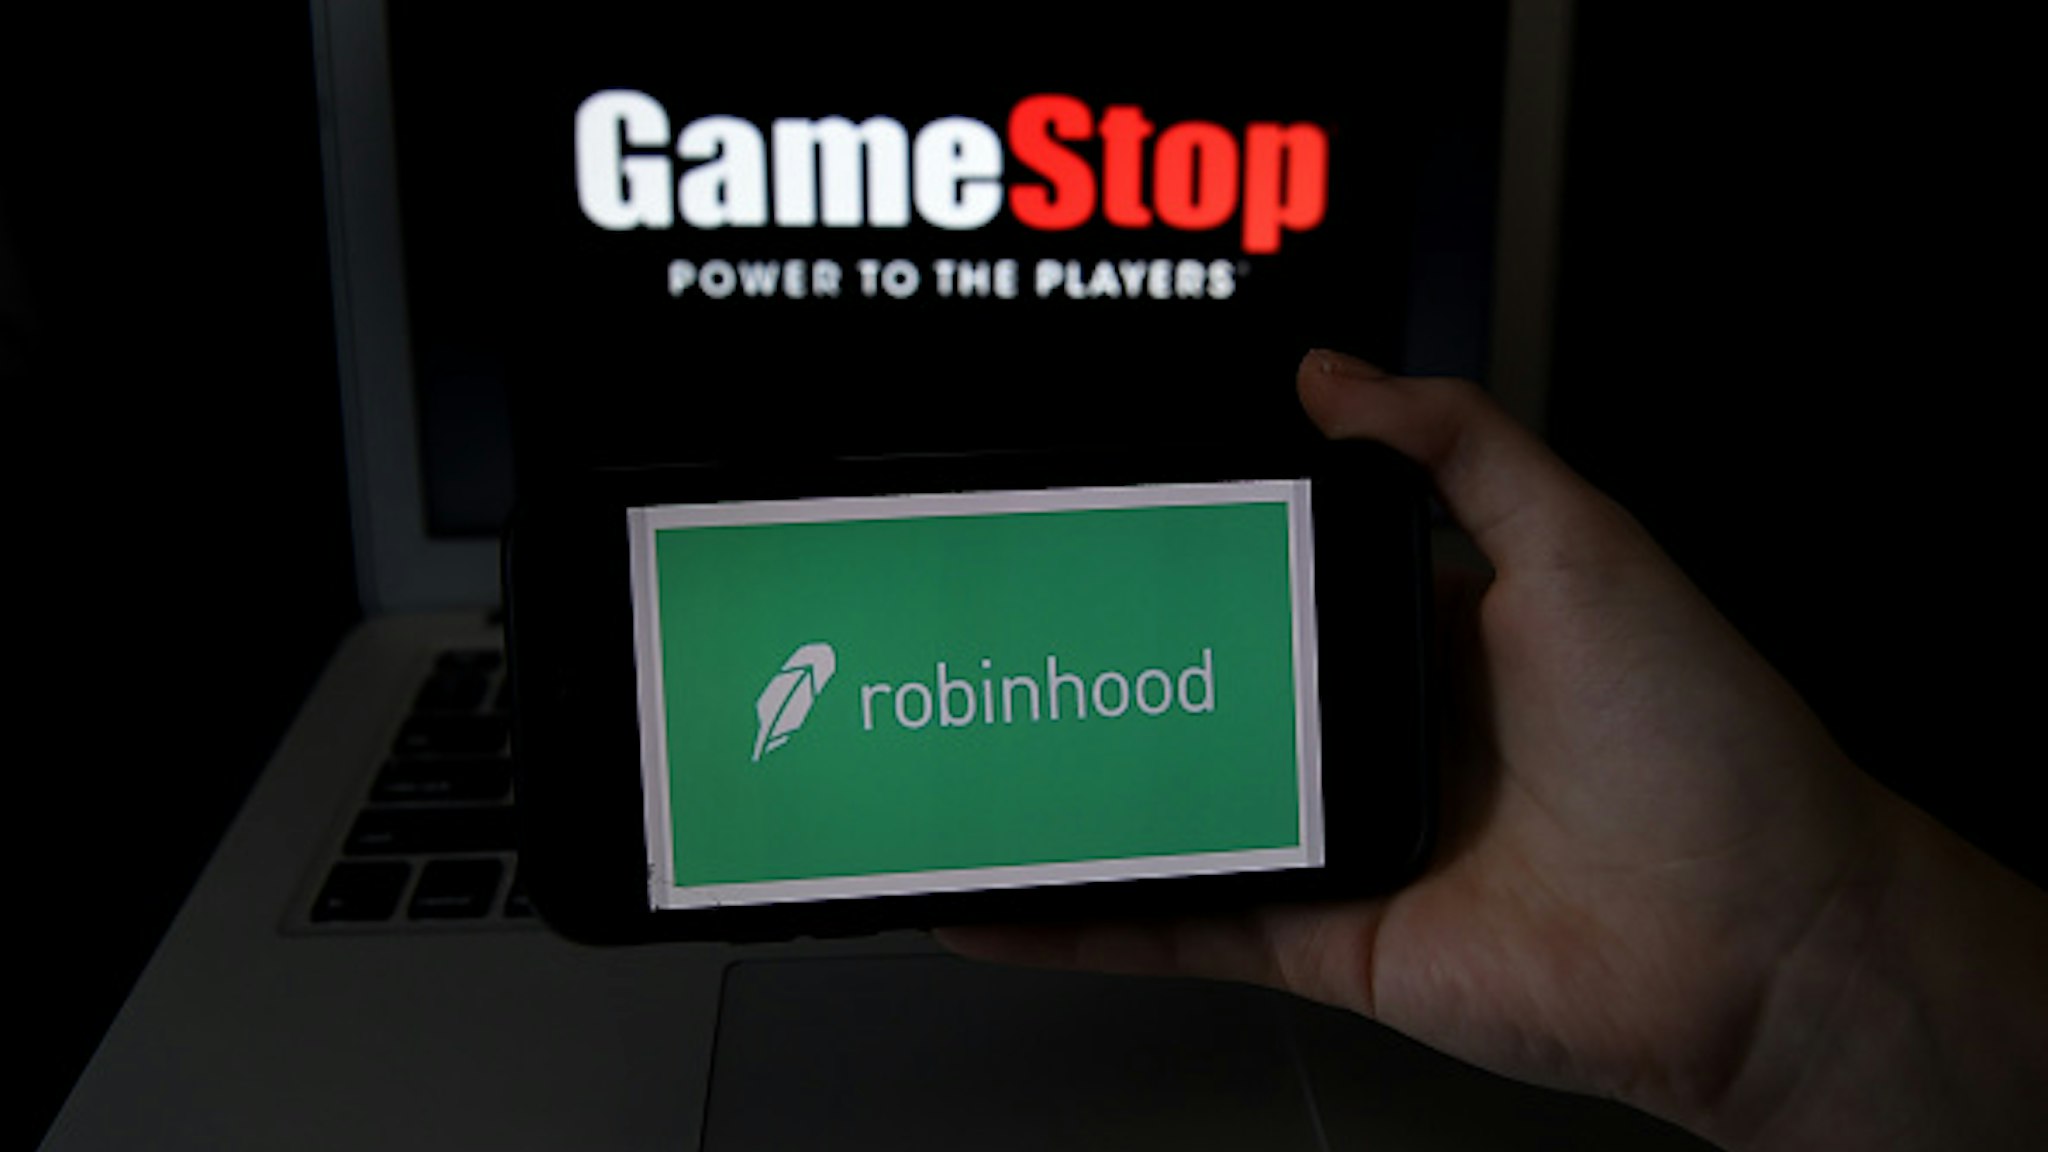 This photo illustration shows the logos of video grame retail store GameStop and trading application Robinhood on a computer and on a mobile phone in Arlington, Virginia on January 28, 2021. - An epic battle is unfolding on Wall Street, with a cast of characters clashing over the fate of GameStop, a struggling chain of video game retail stores. The conflict has sent GameStop on a stomach-churning ride with amateur investors taking on the financial establishment in the mindset of the Occupy Wall Street movement launched a decade ago.